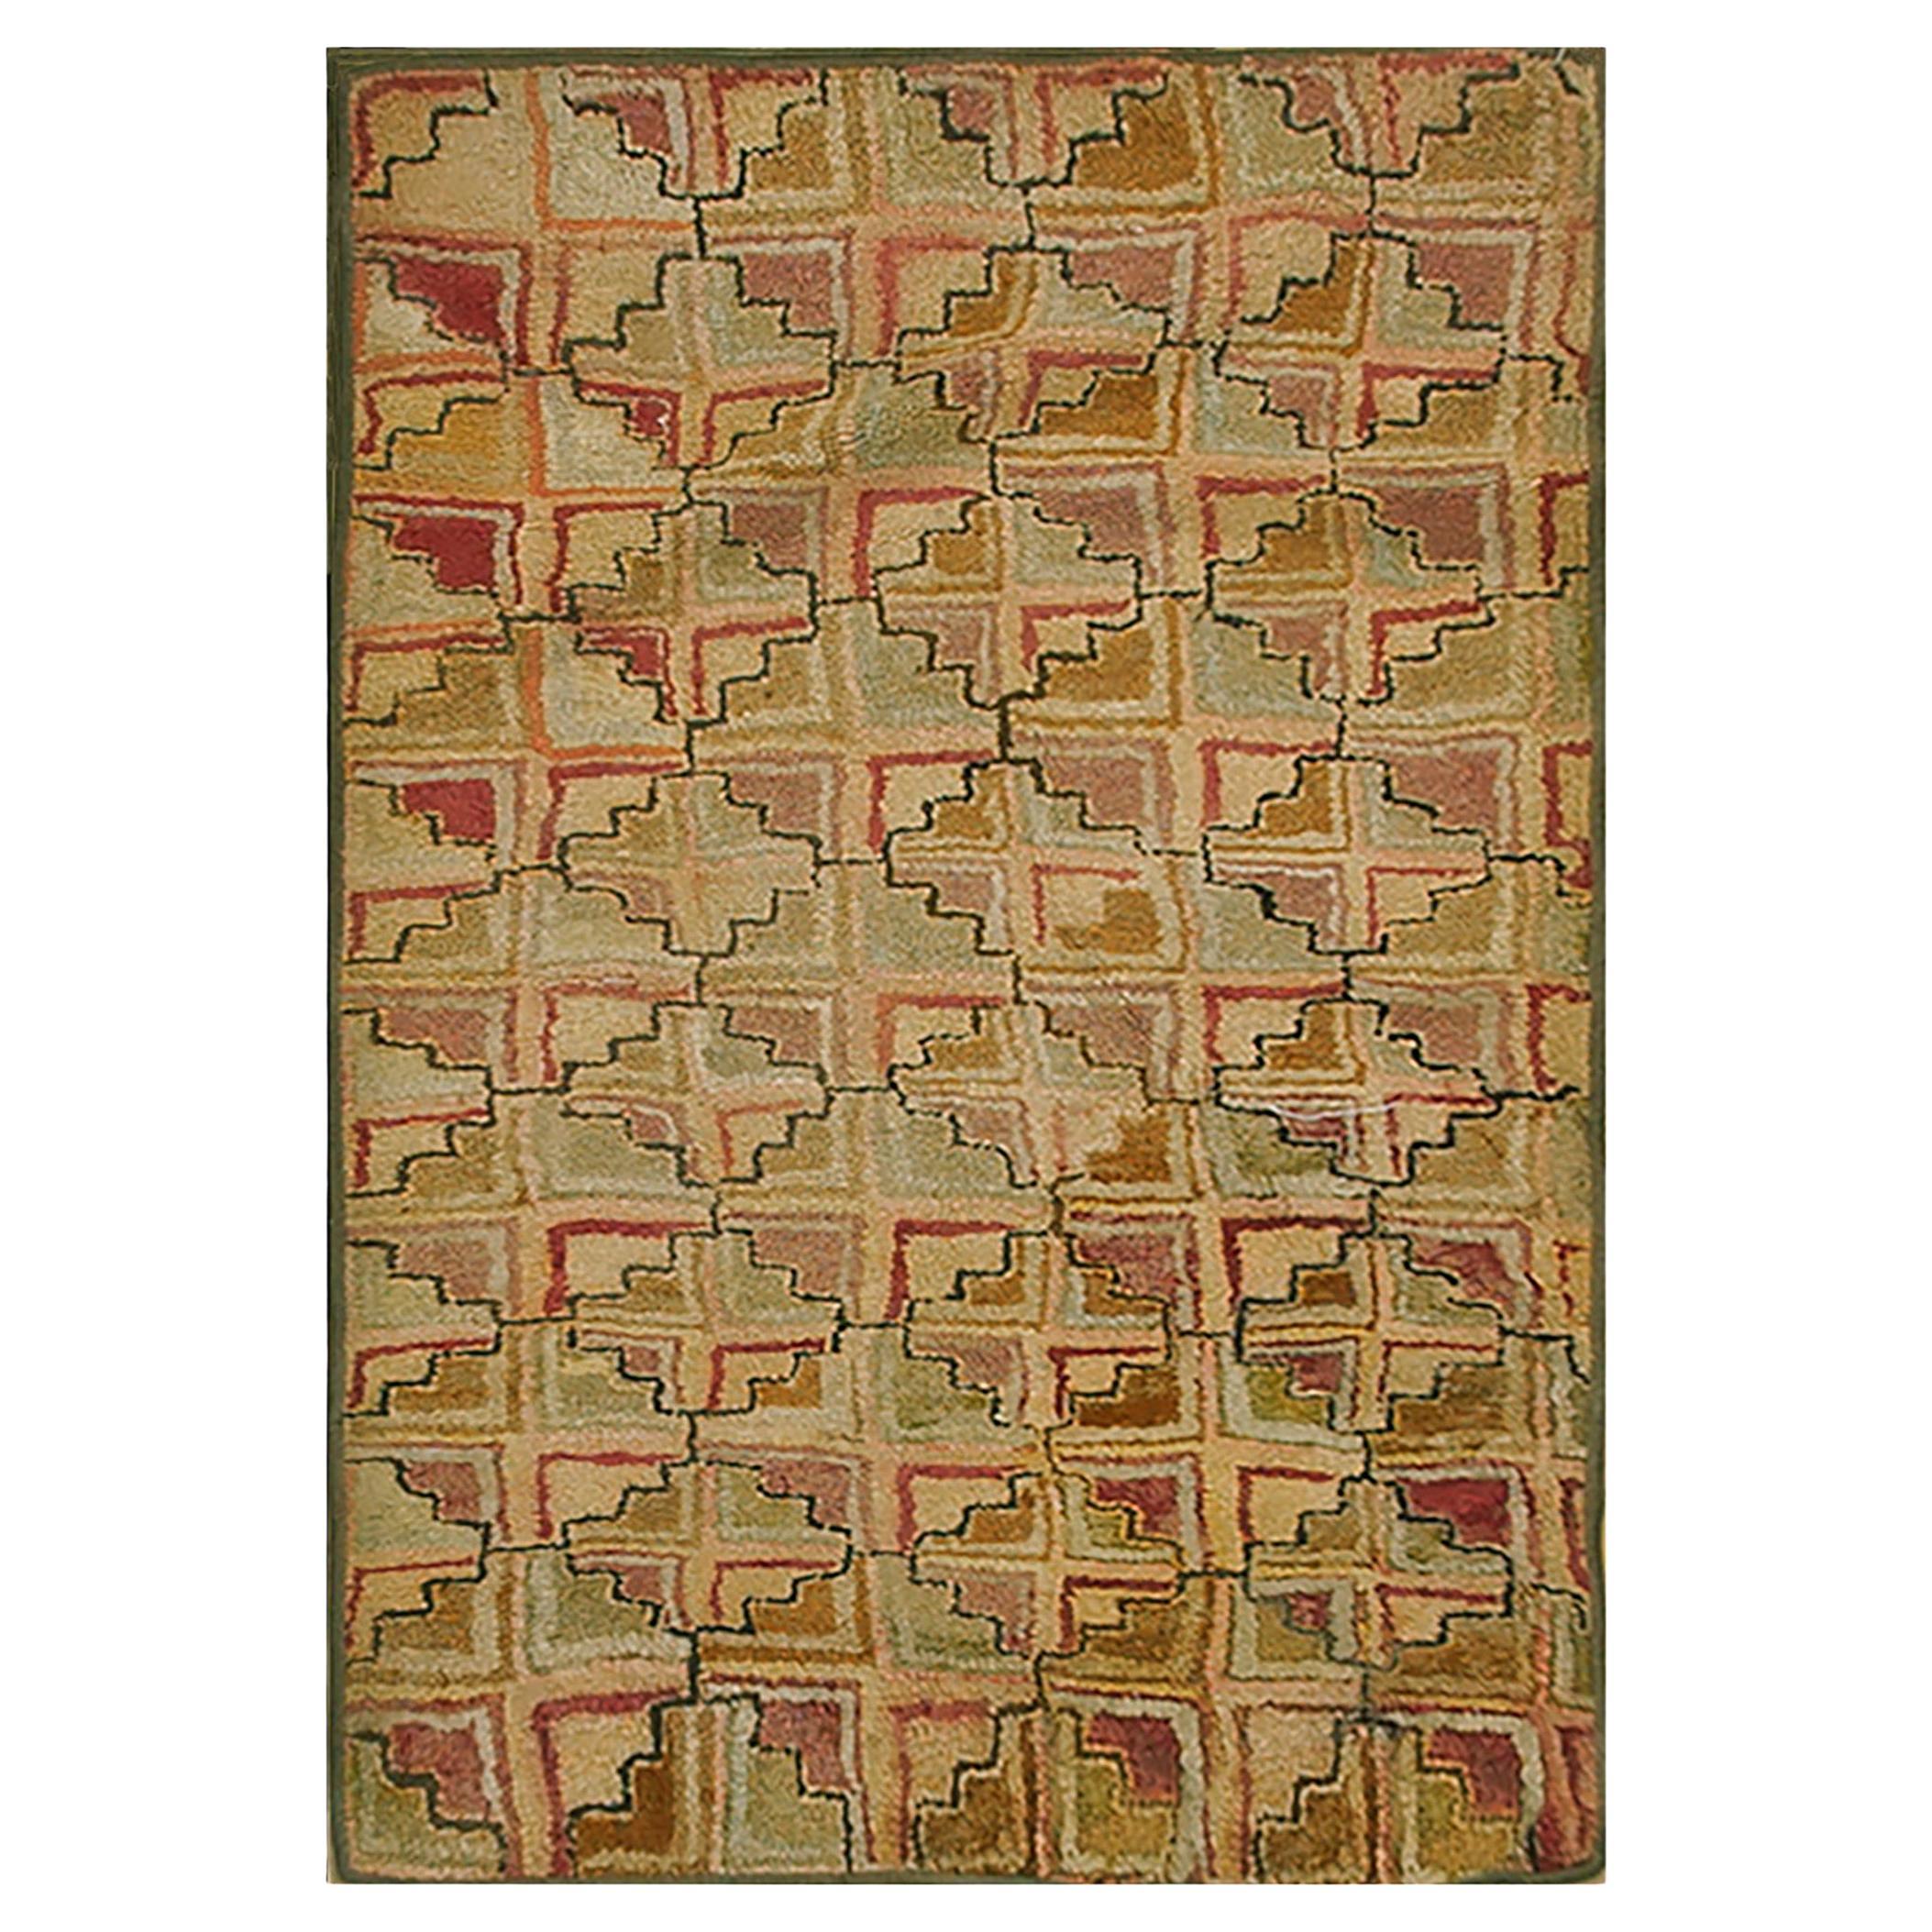 Early 20th Century American Hooked Rug  (2' 7'' x 5' - 78 x 152 cm )